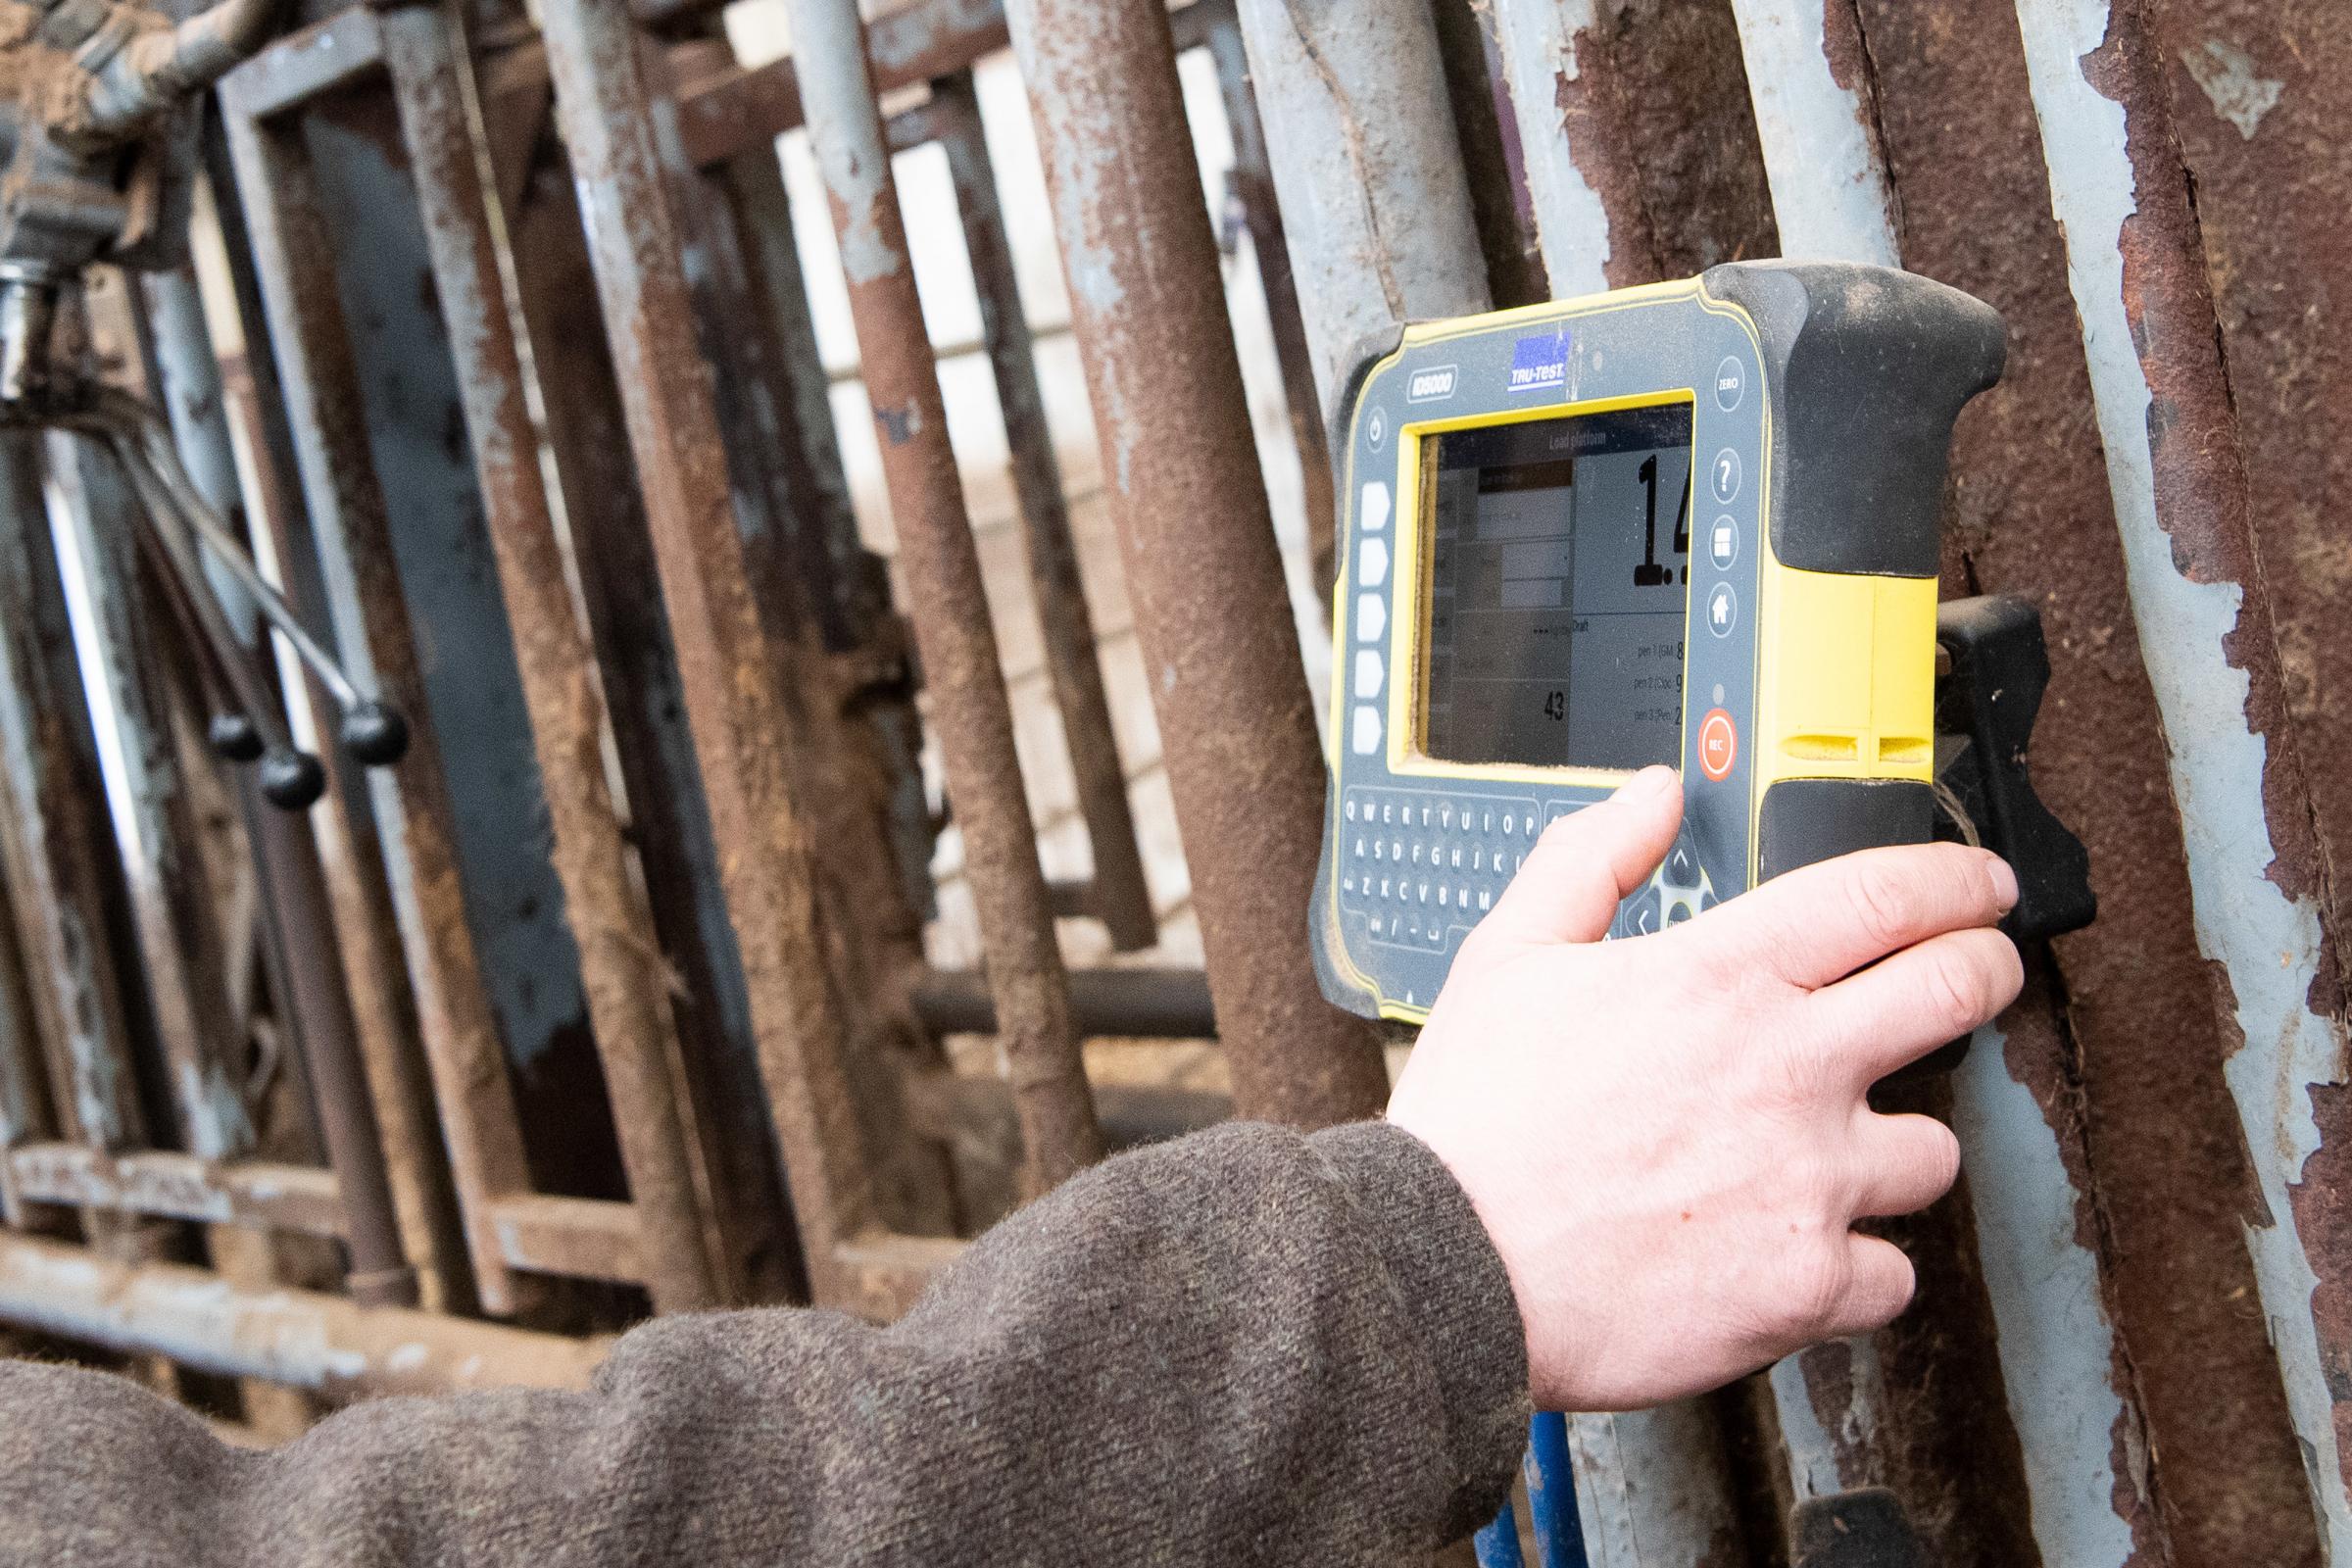 the best investment was the squeeze crush with weighting cells, the Wilsons can easily monitor and dose cattle when required Ref:RH170521144 Rob Haining / The Scottish Farmer...